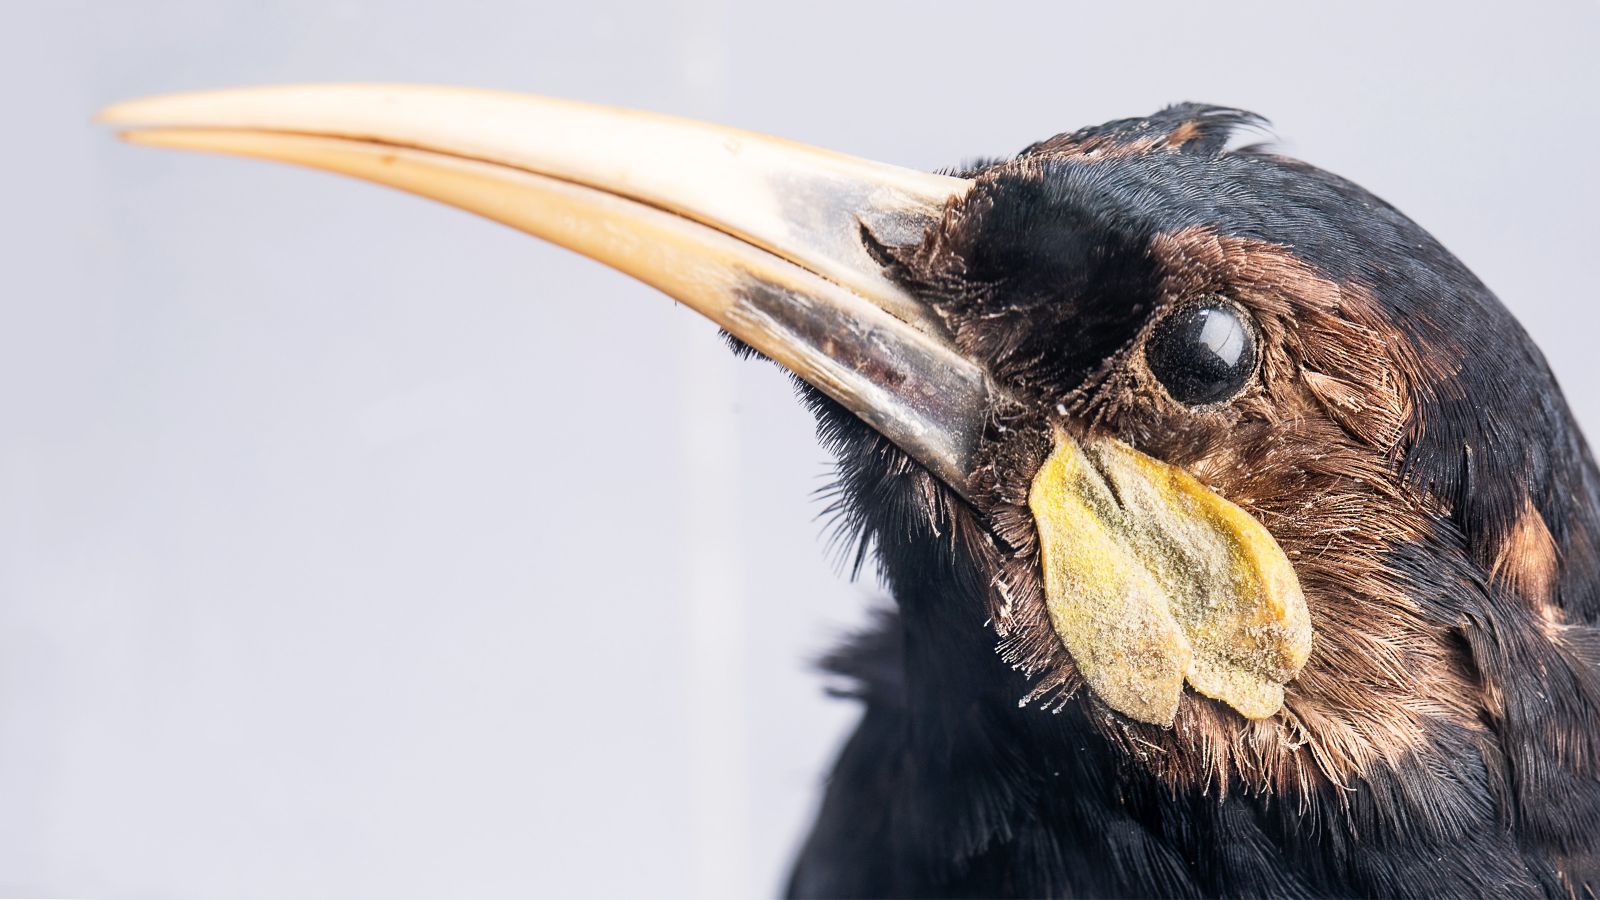 A close up view of the head and beak of a preserved Huia bird.